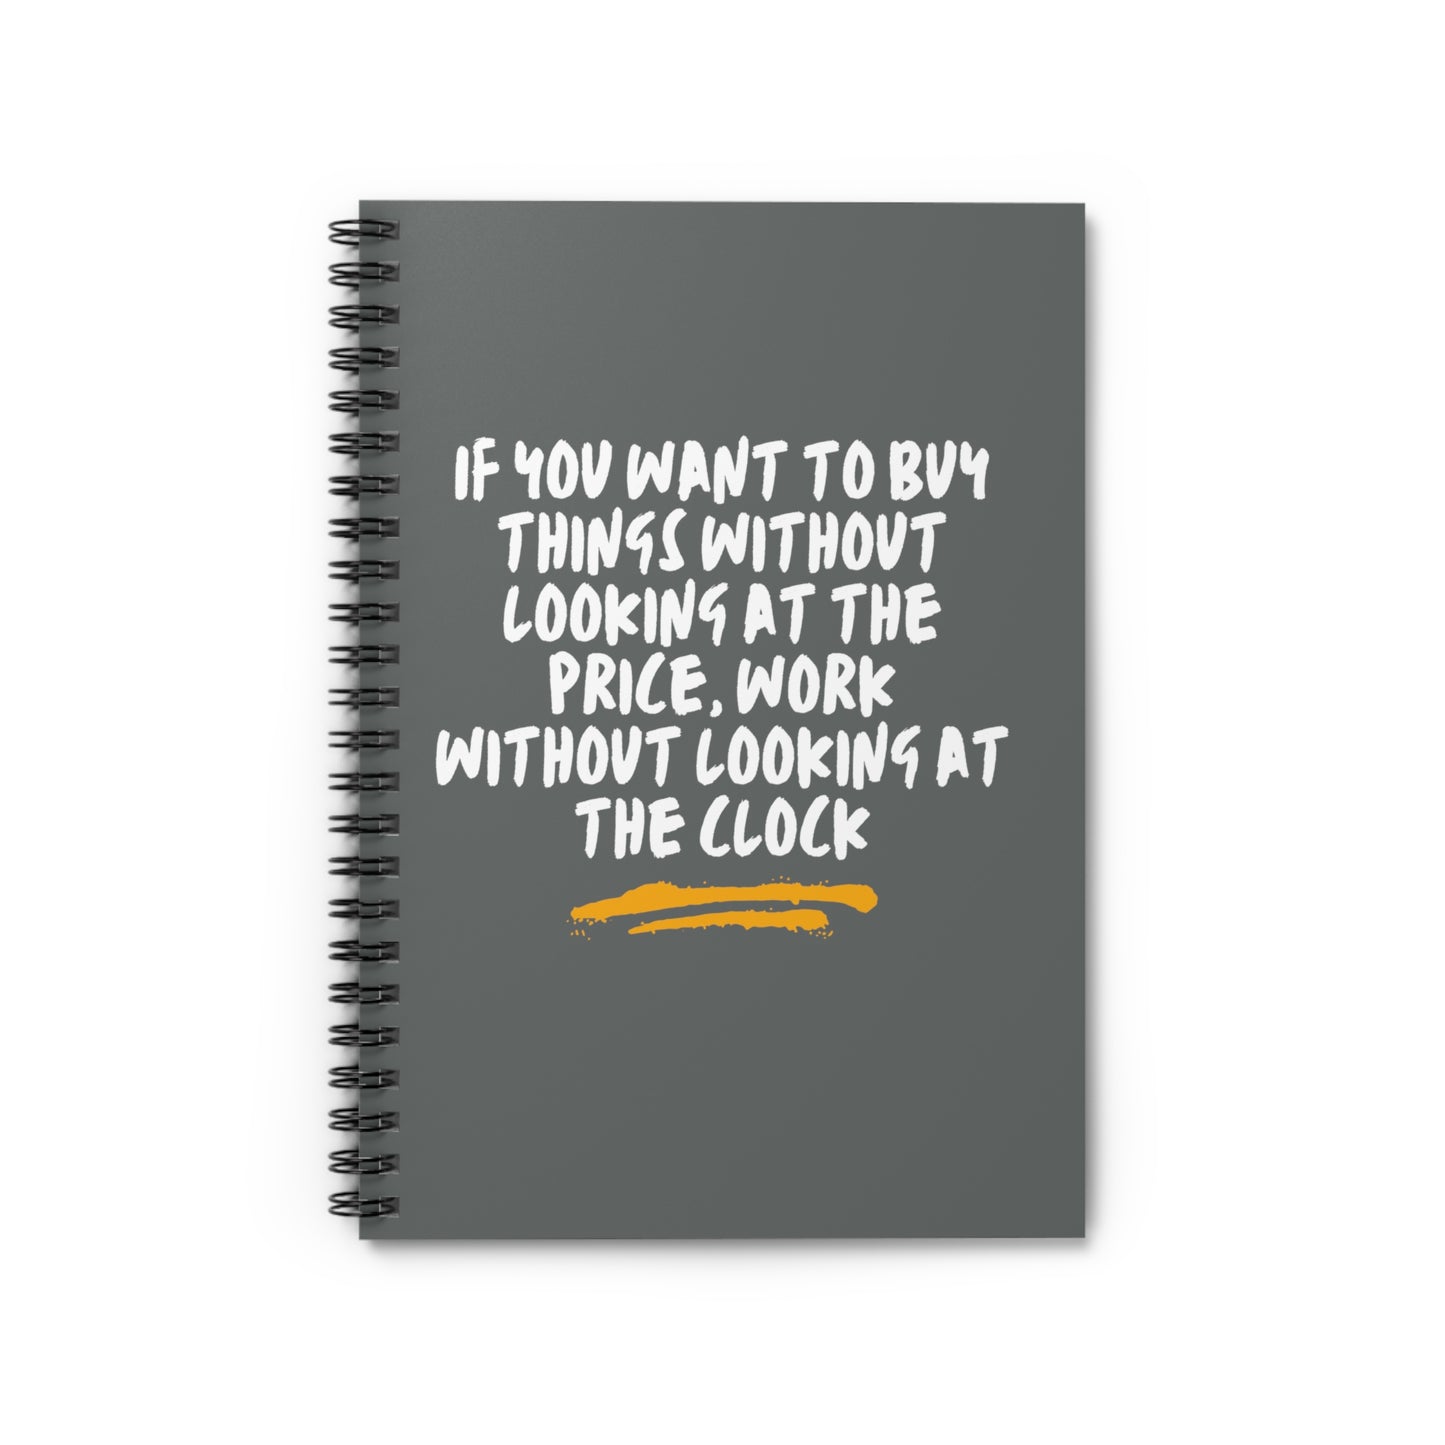 Work without looking at the clock Spiral Notebook - Ruled Line